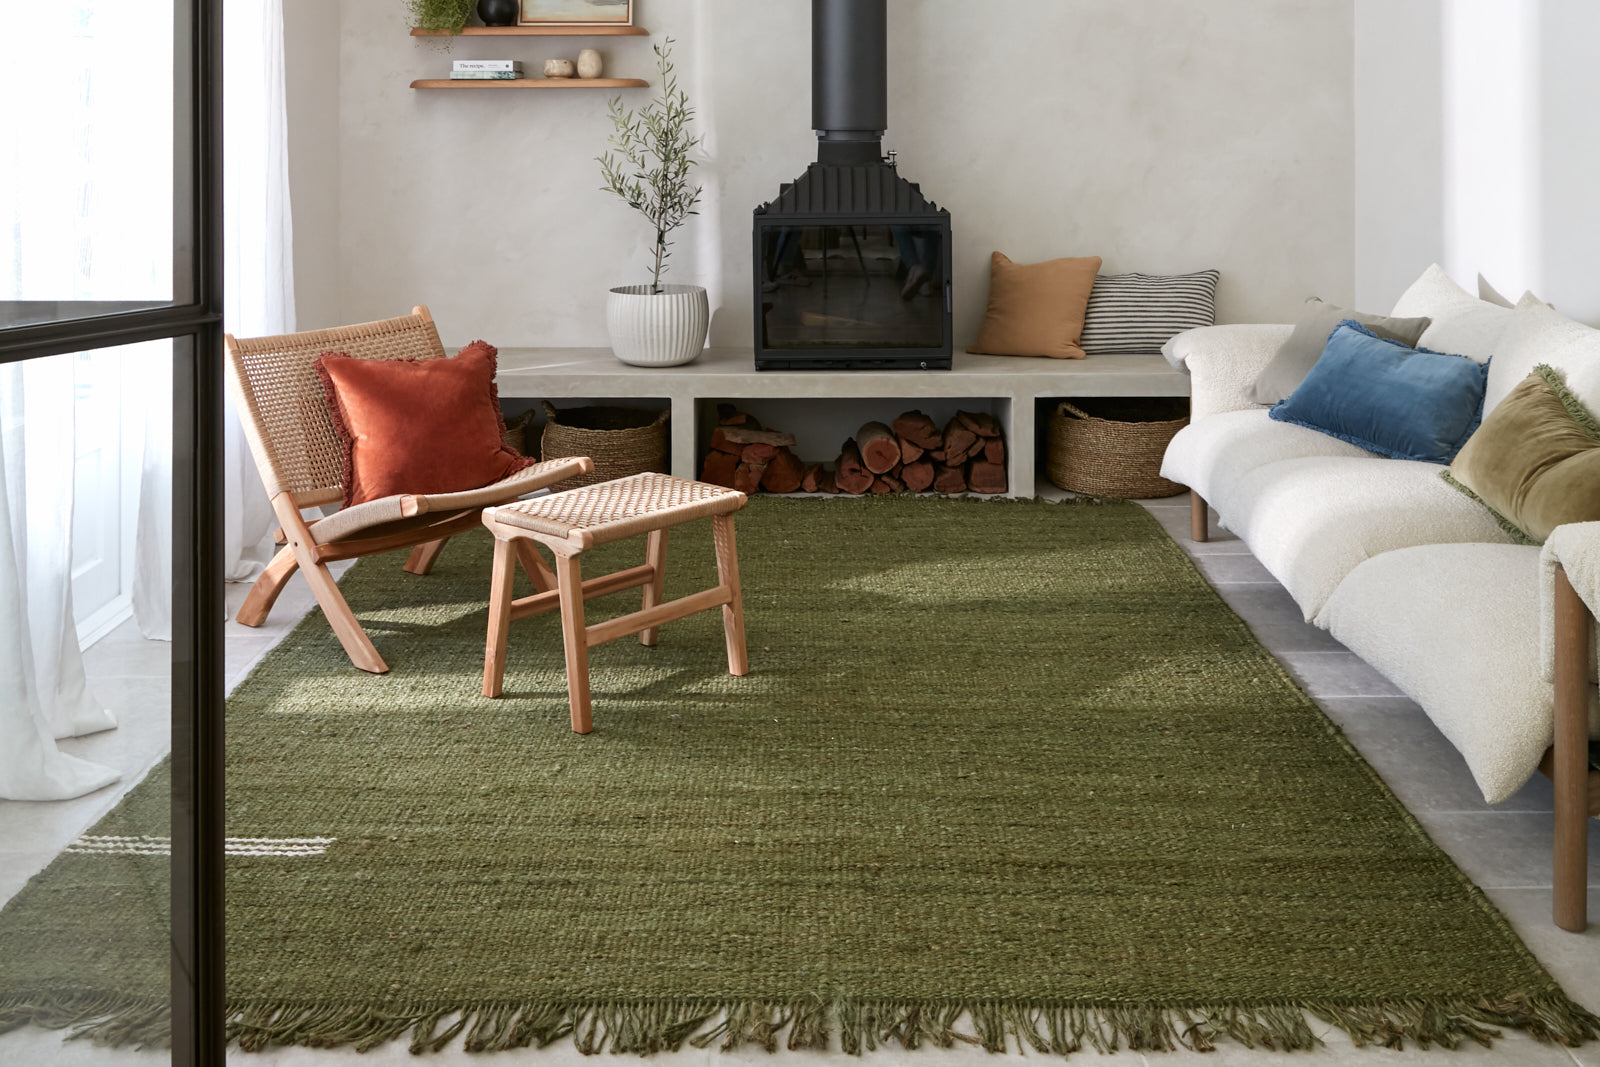 How to Place Green Rugs In Every Room in Your Home